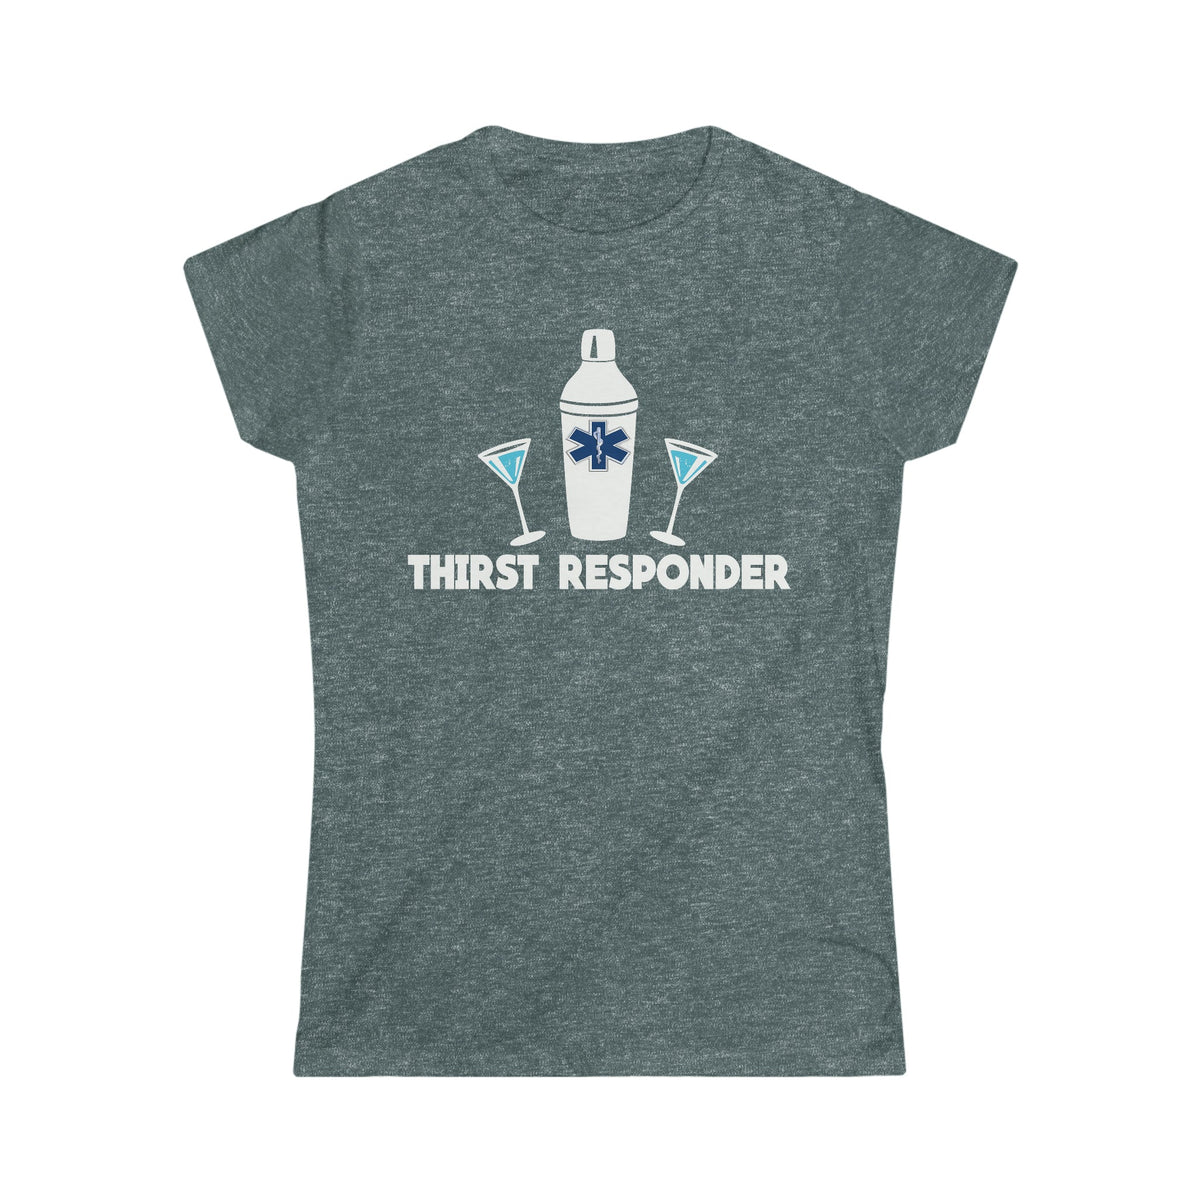 Thirst Responder Women's Soft Style Tee - Salty Medic Clothing Co.